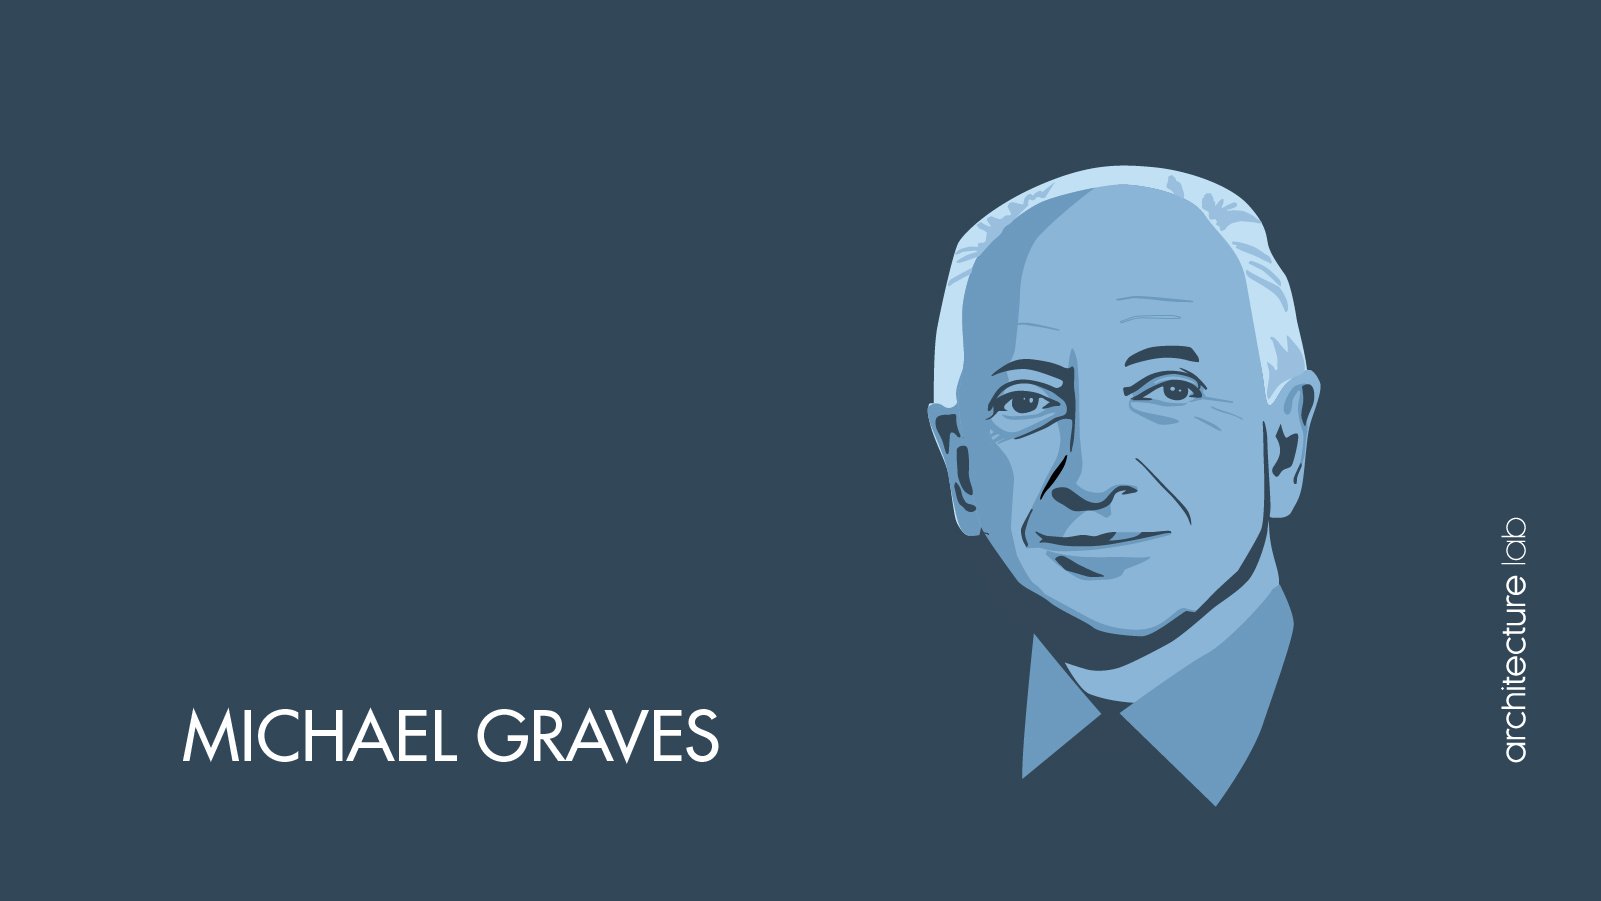 Michael graves: biography, works, awards